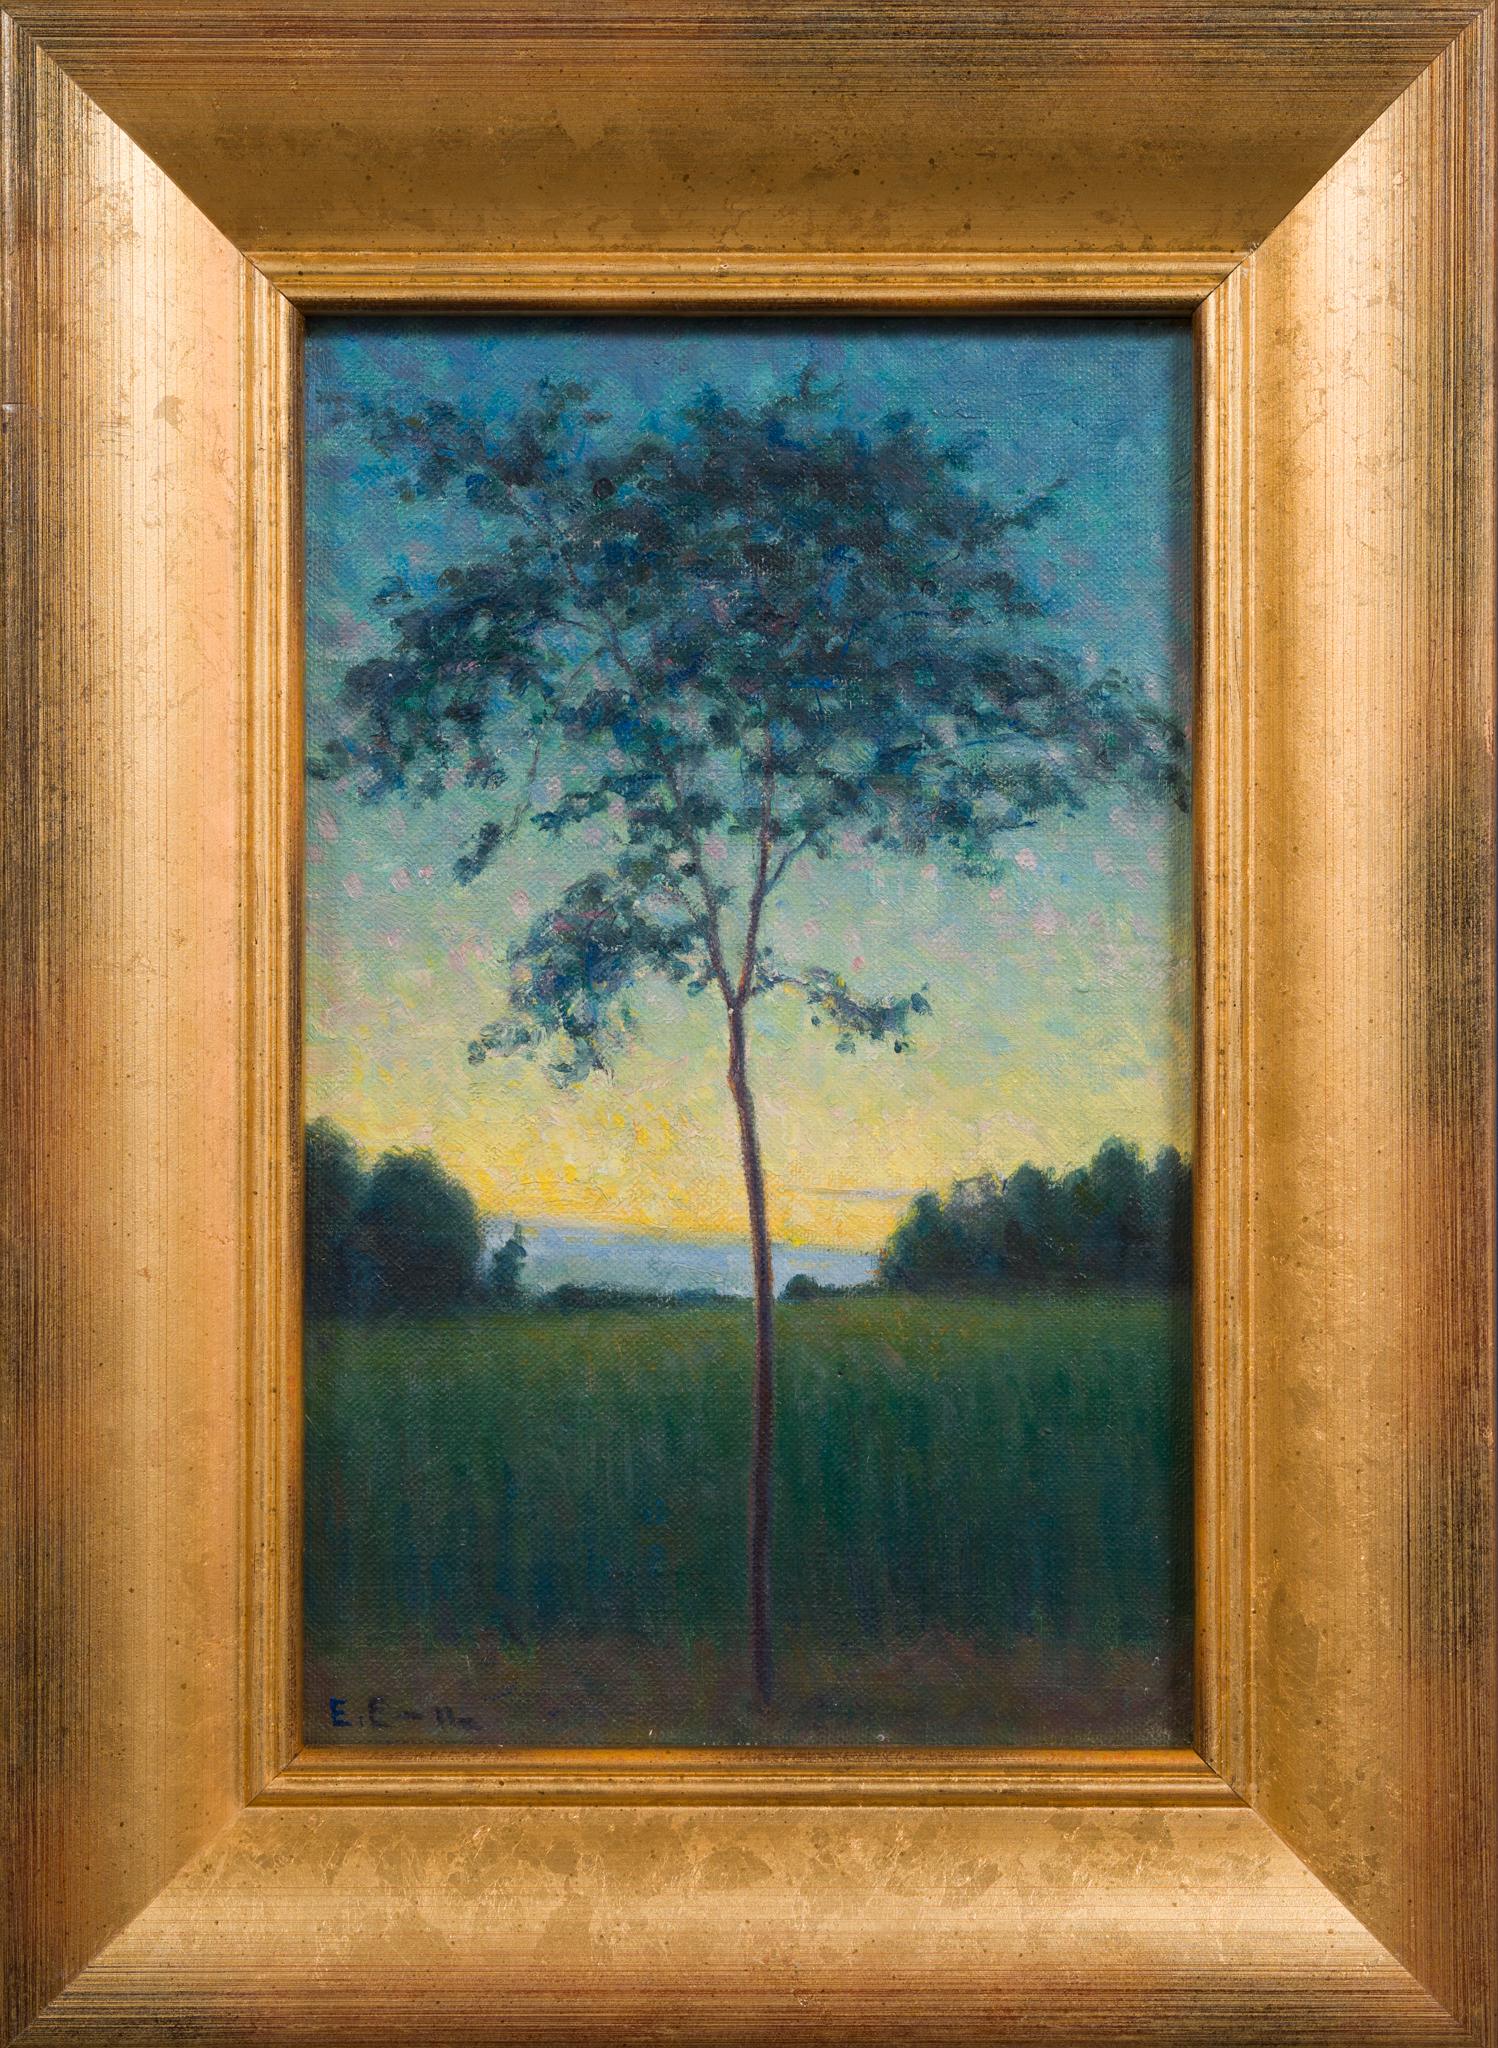 This painting called "Sunset over the Field" by Elias Erdtman captures the serene beauty of lonely tree standing proudly in the foreground against a backdrop of a lush green meadow, bathed in the warm glow of a setting sun. Measuring just 29.5 x